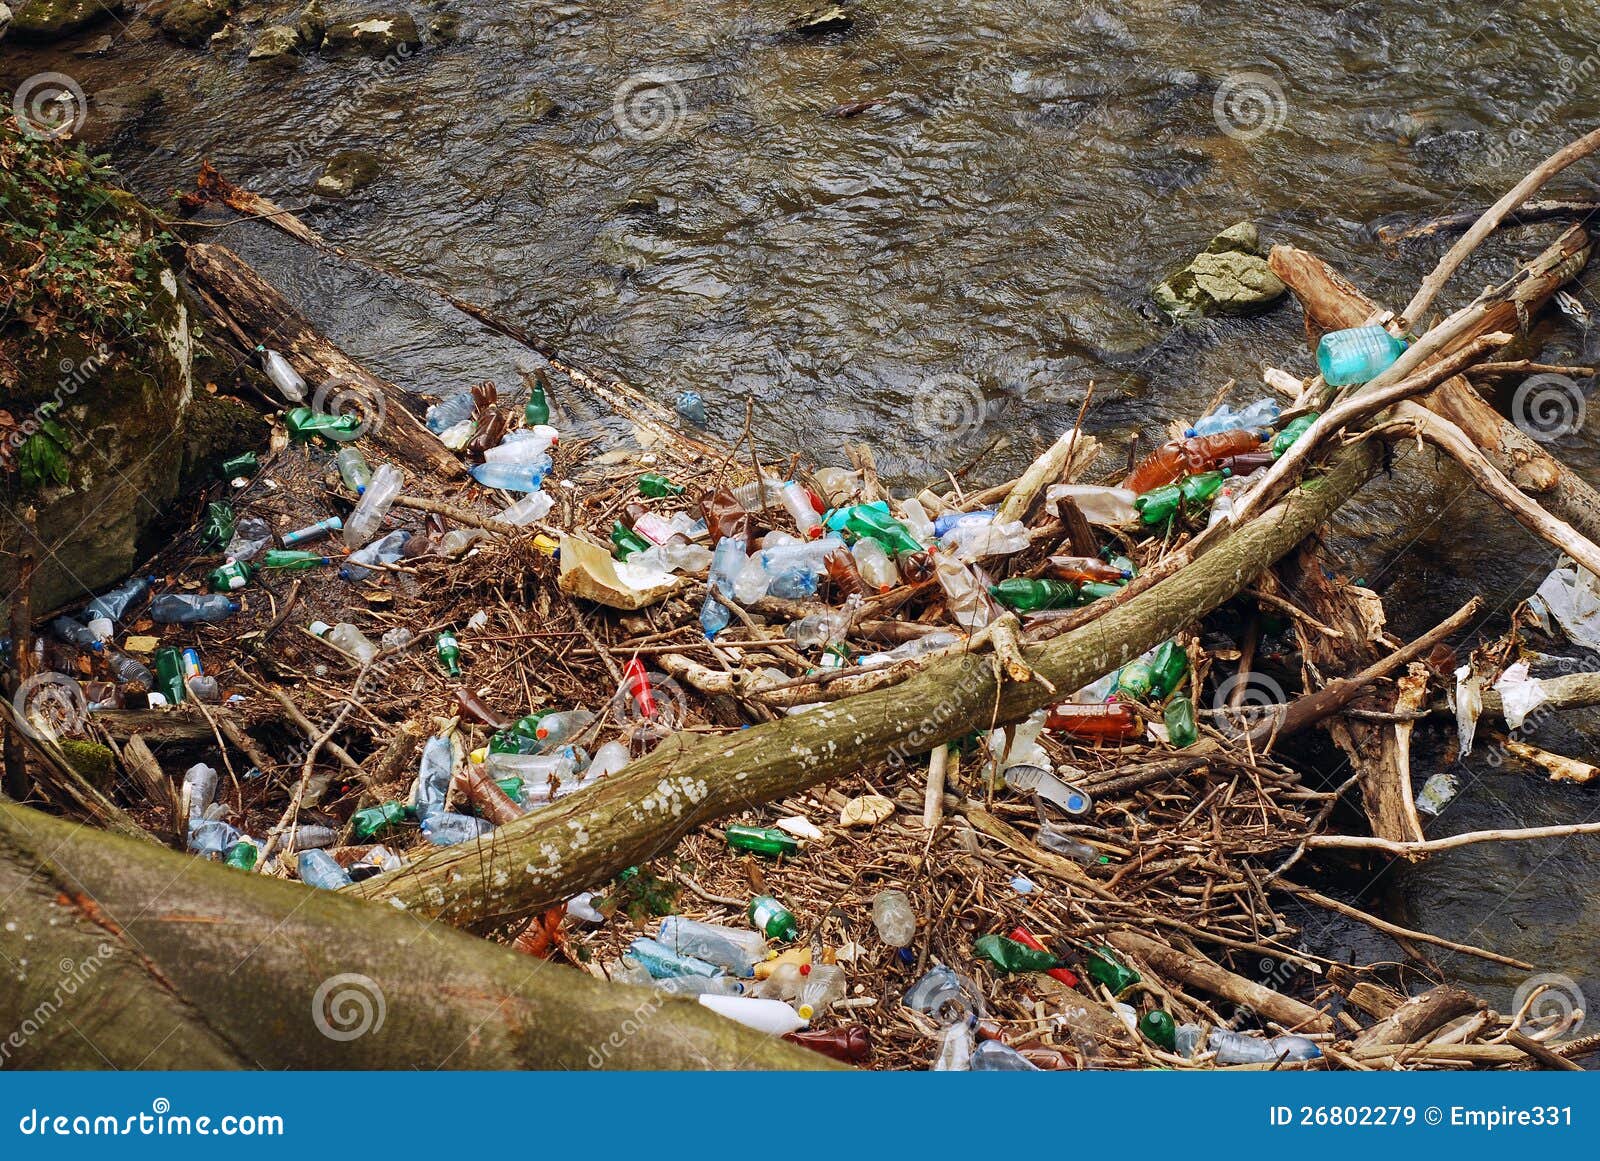 Water pollution stock image. Image of filthy, dirty